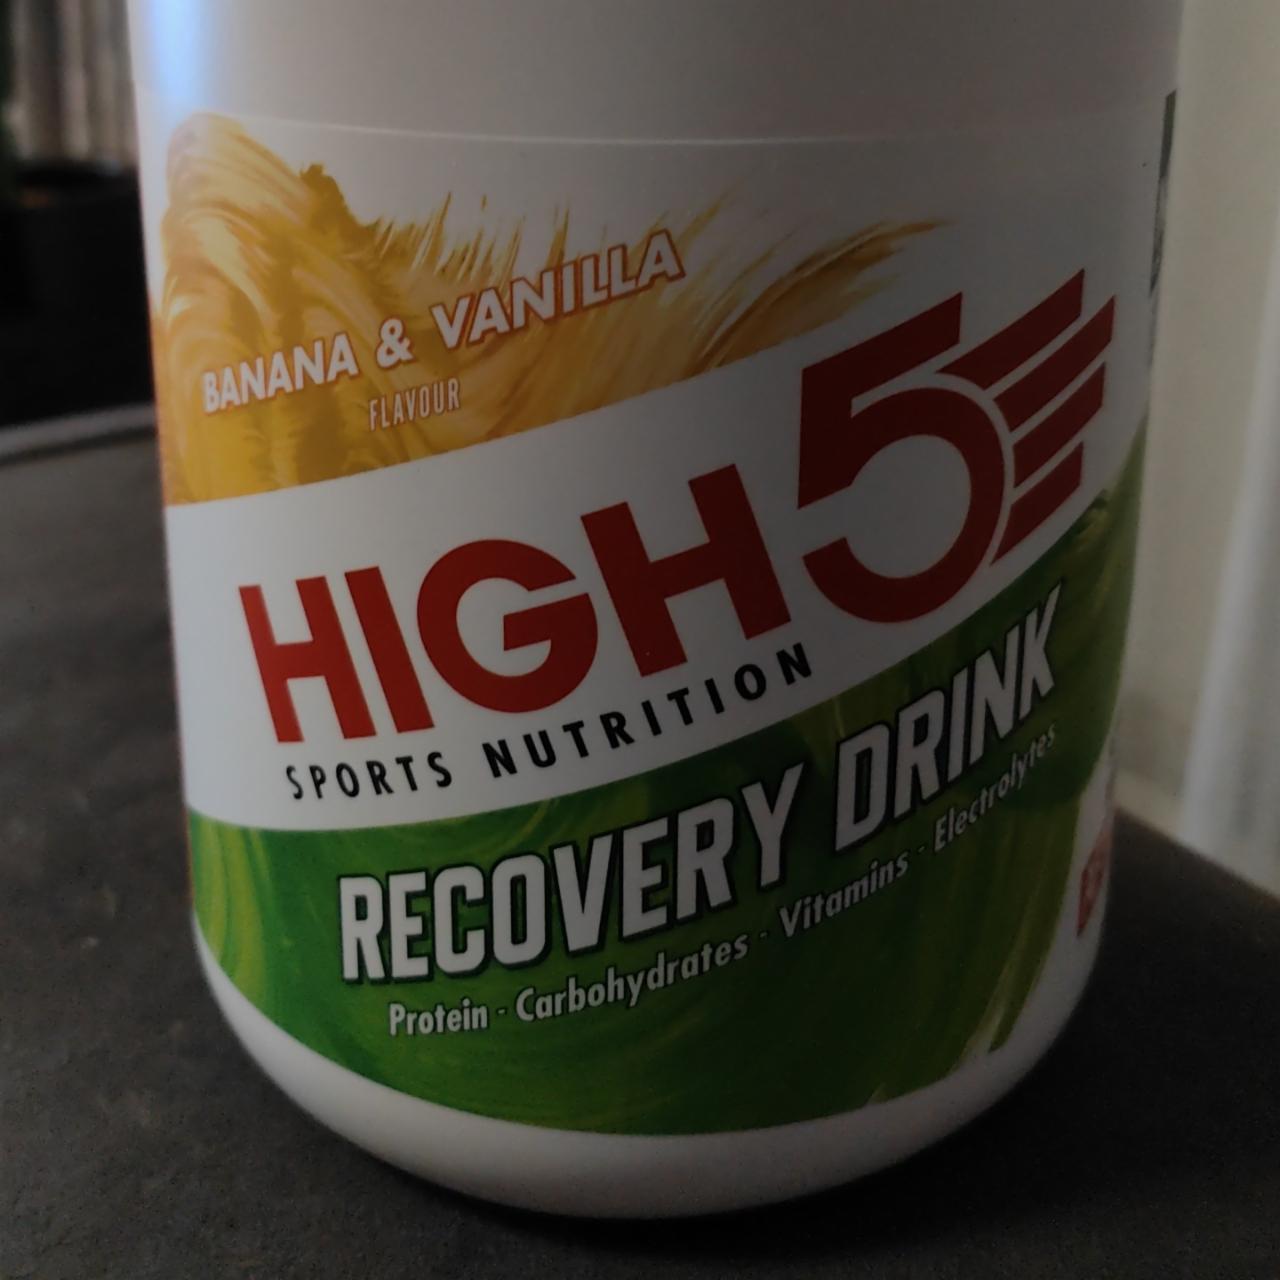 Fotografie - Recovery Drink Banana & Vanilla Flavour High5